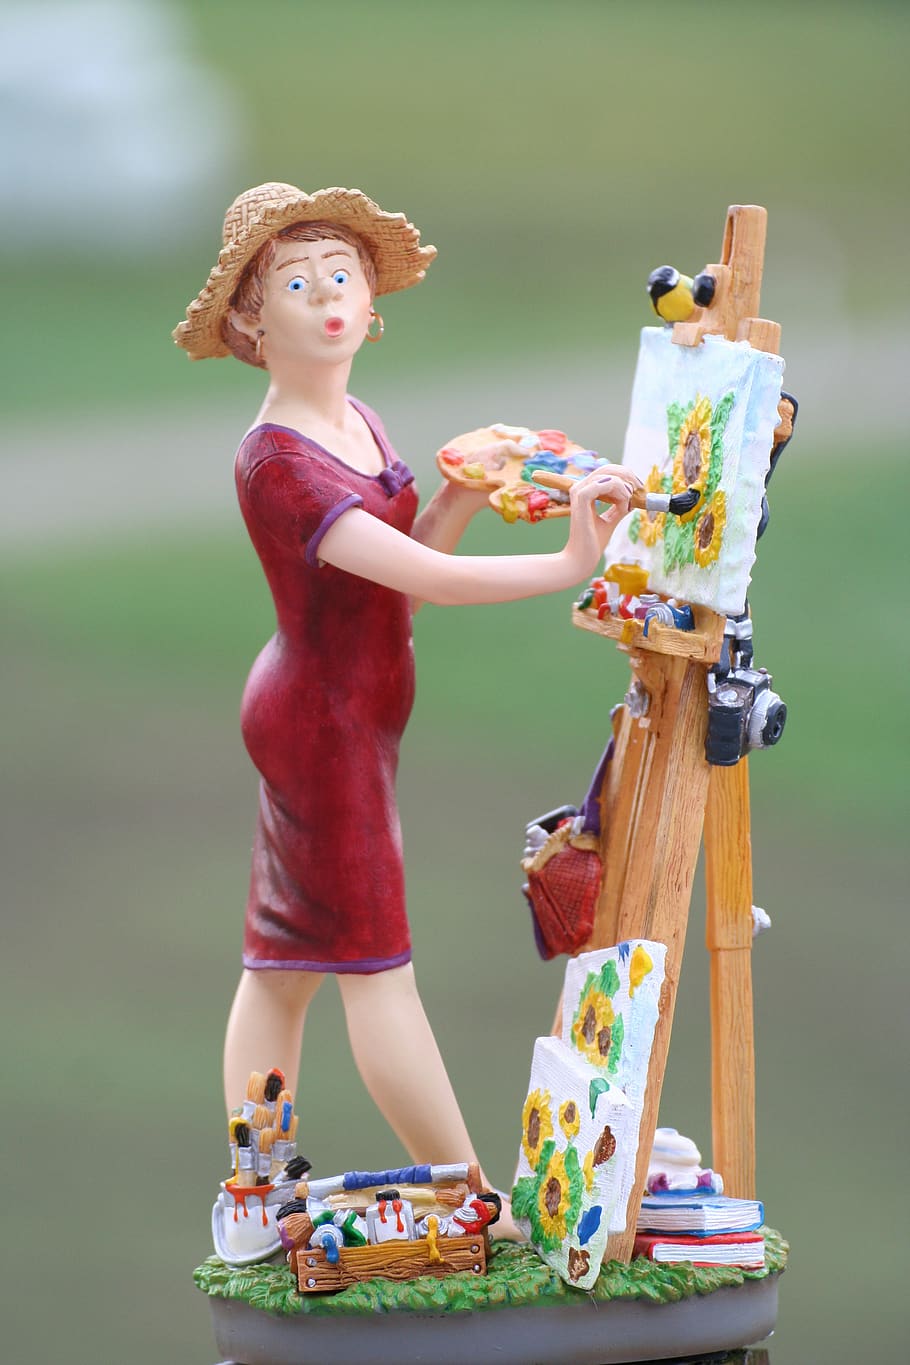 female, painter, red, dress, straw hat, artist, art, concentration, woman, brush